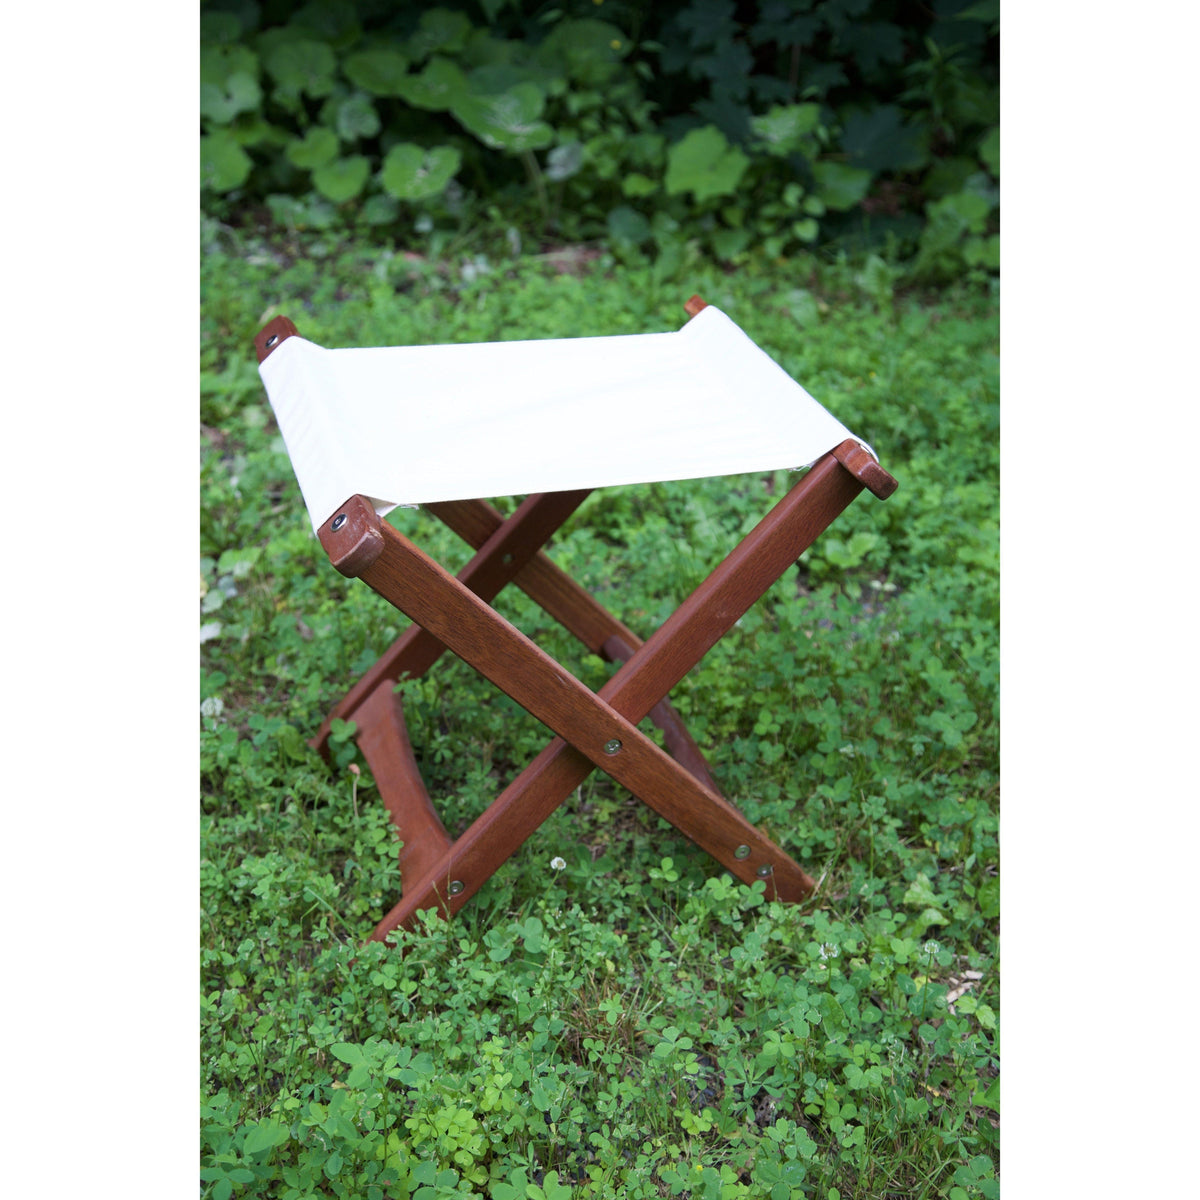 Pangean Folding Stool, from Byer of Maine